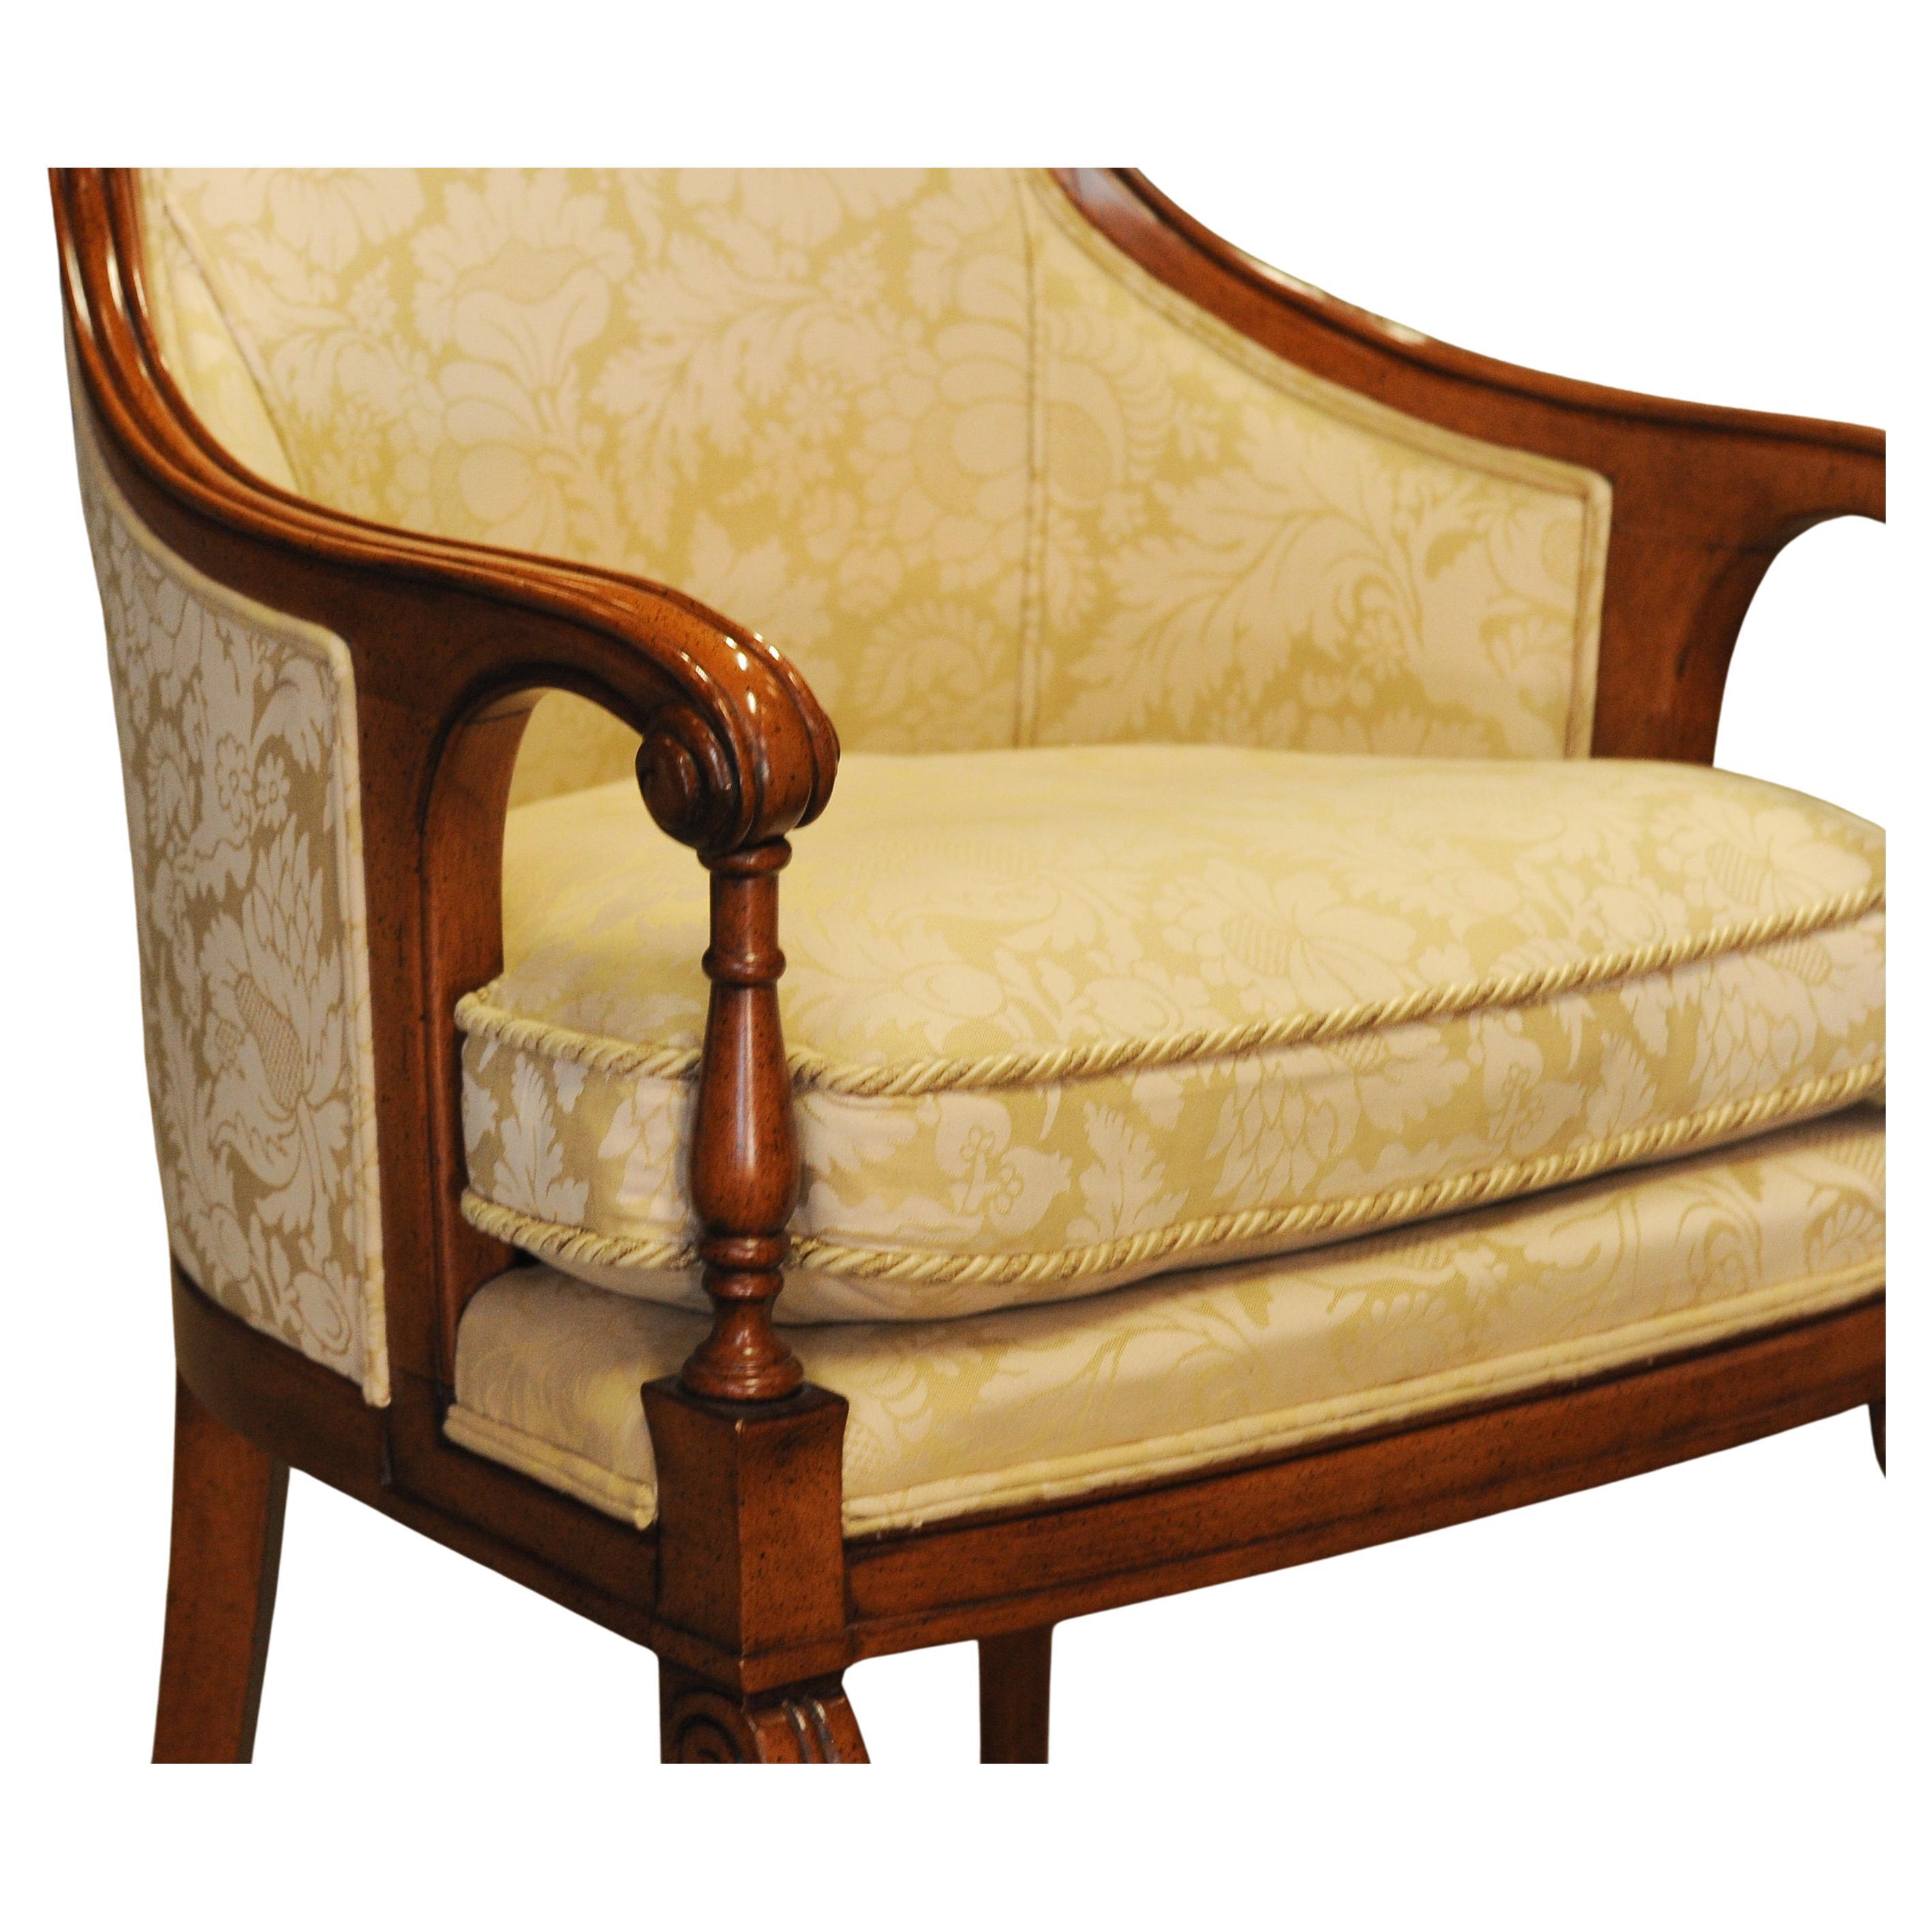 Elegant Pair of William IV Design Bergere Armchairs With Cream Damask Upholstery For Sale 5